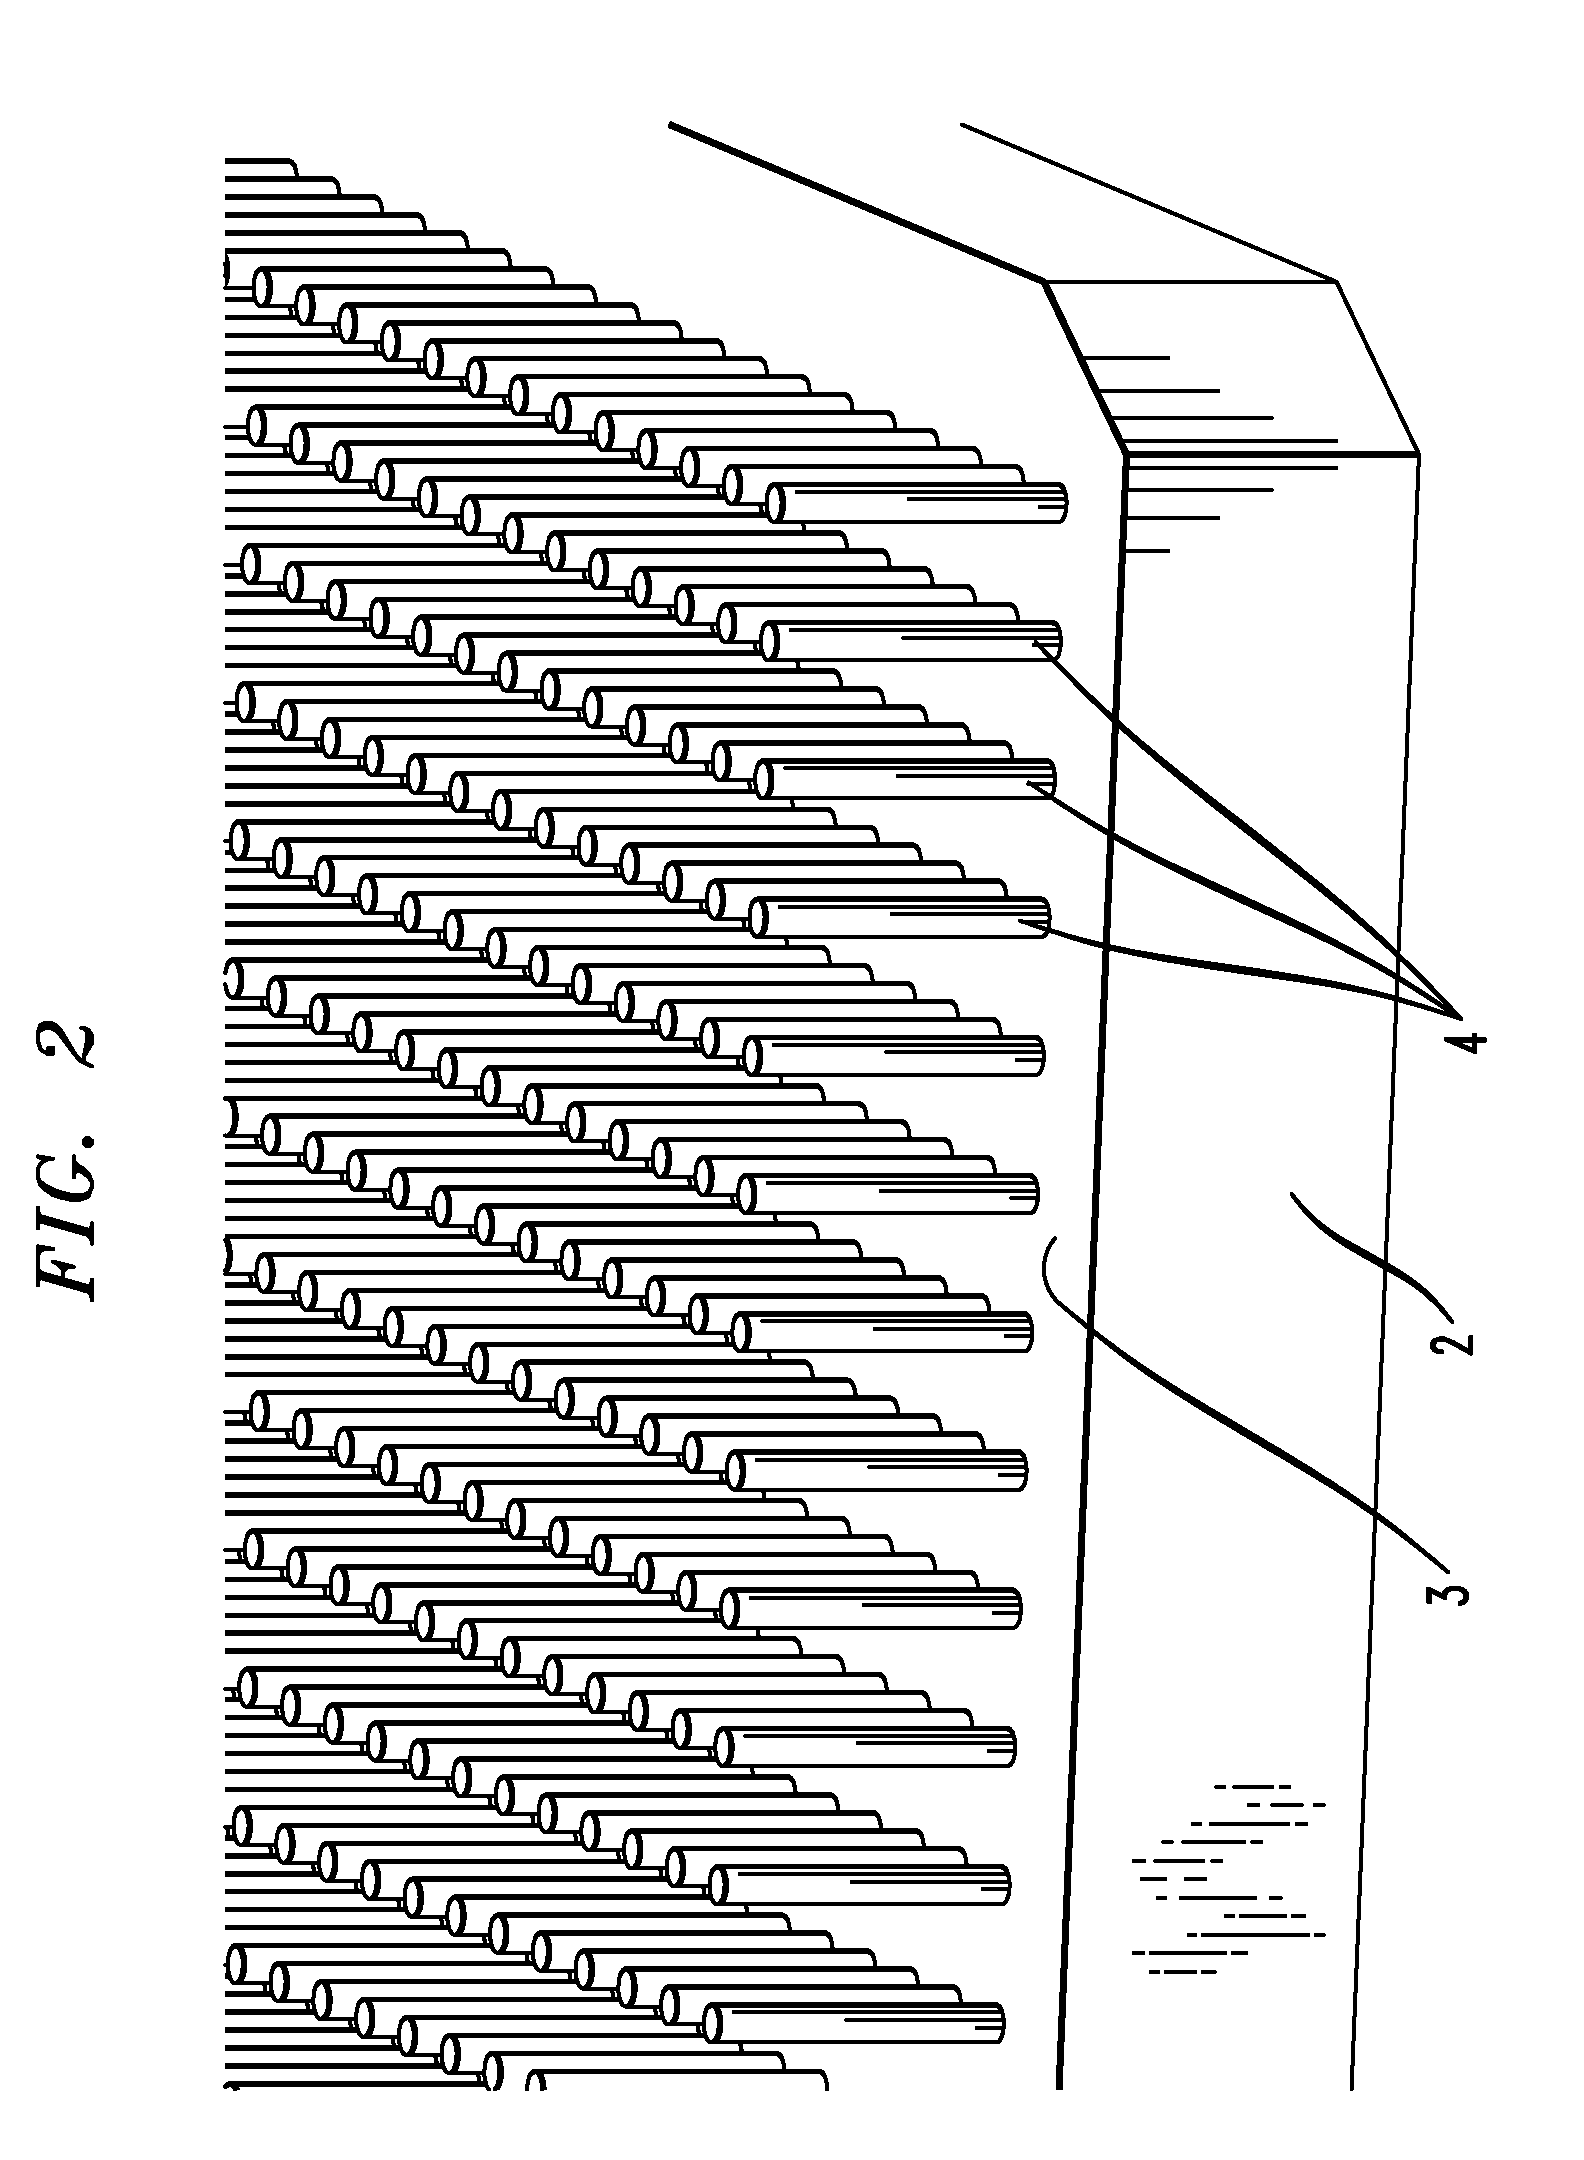 Pin grid array zero insertion force connectors configurable for supporting large pin counts